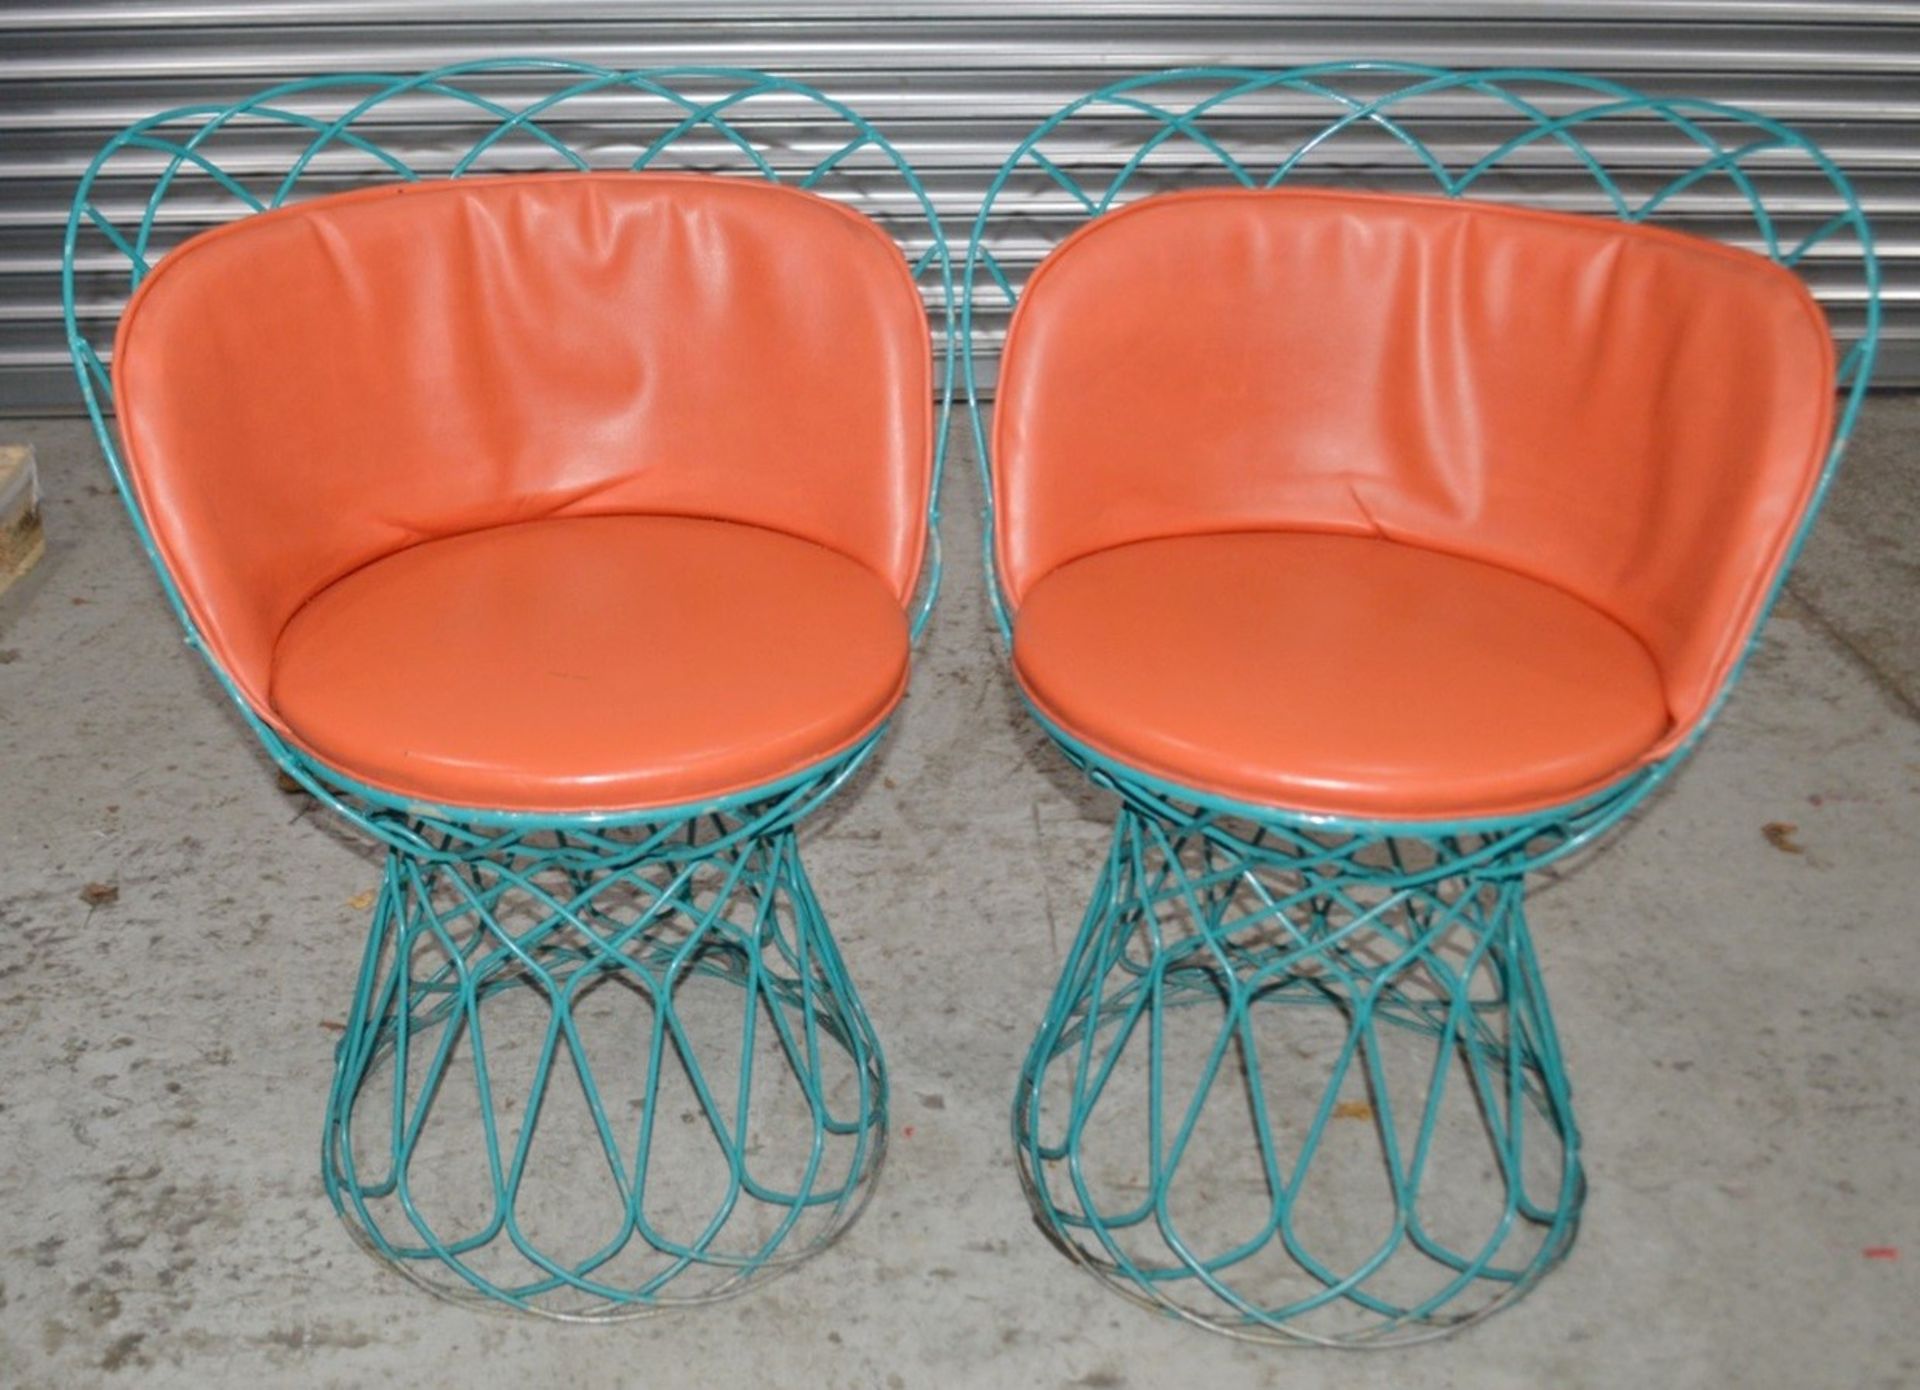 2 x Commercial Outdoor Wire Bistro Chairs With Padded Seats In Orange - Dimensions: H80 x W62 x D45c